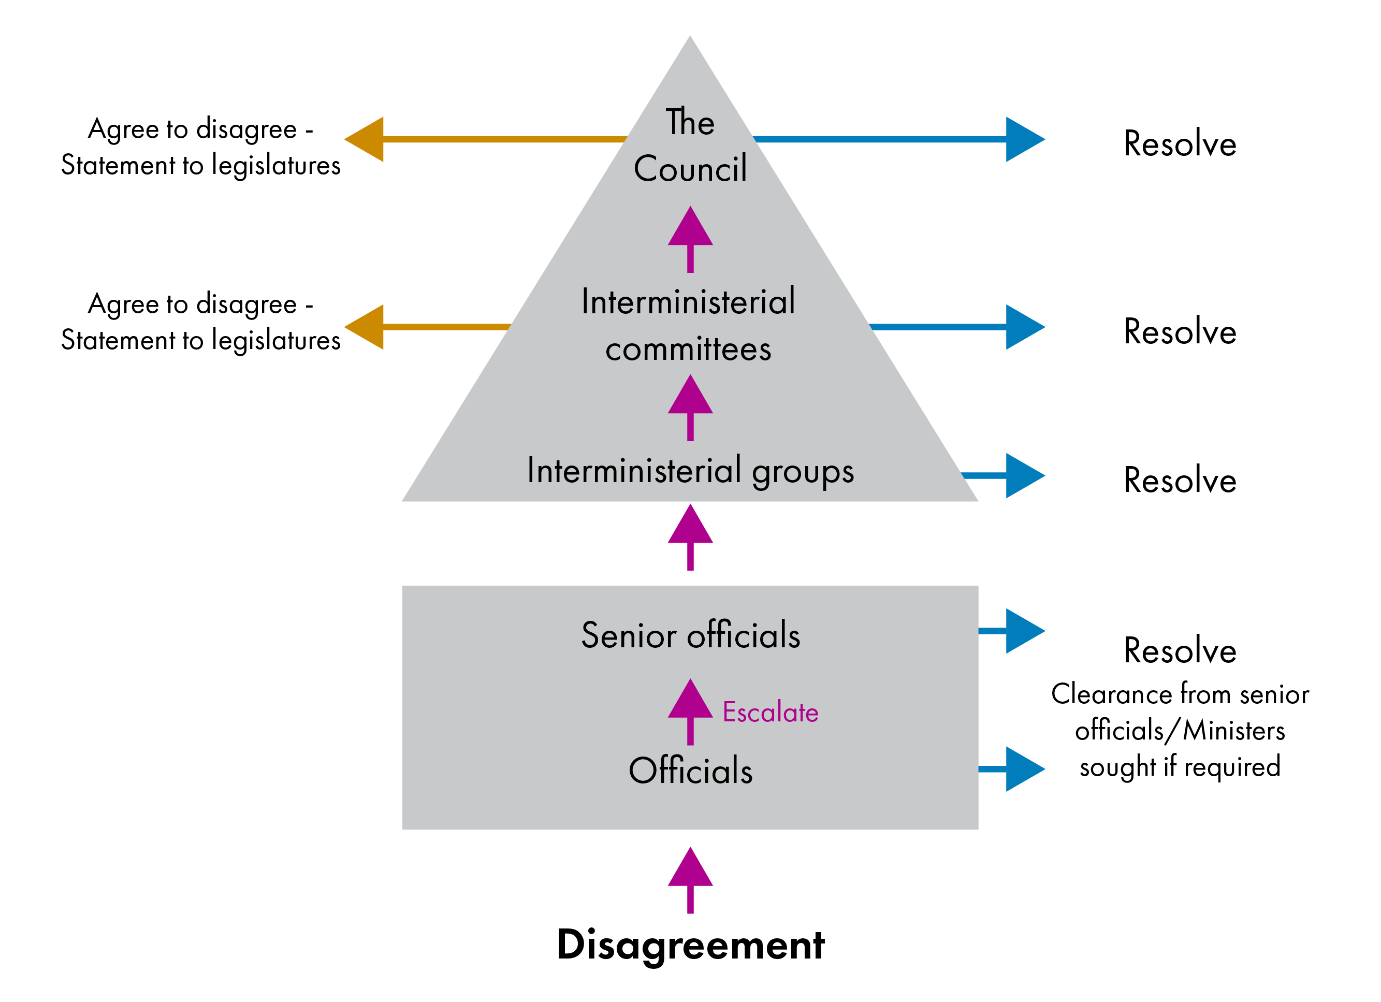 Flow chart of intergovernmental dispute resolution process across common frameworks